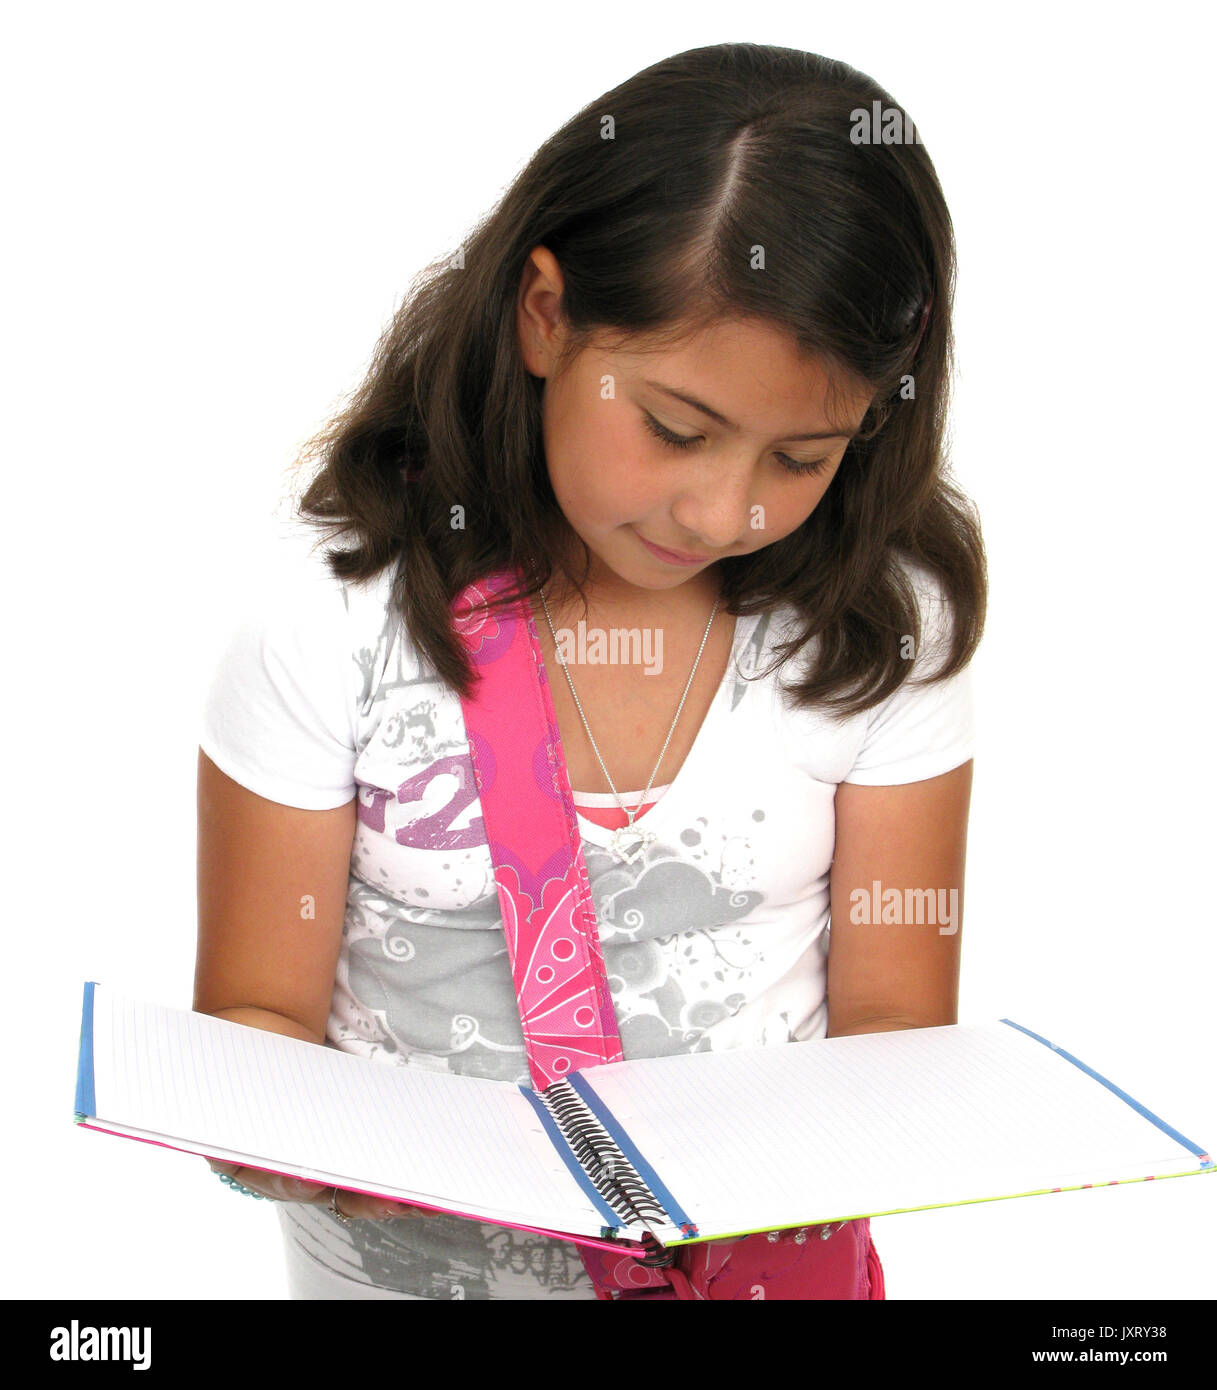 Beautiful Six Year old readign book over white Stock Photo